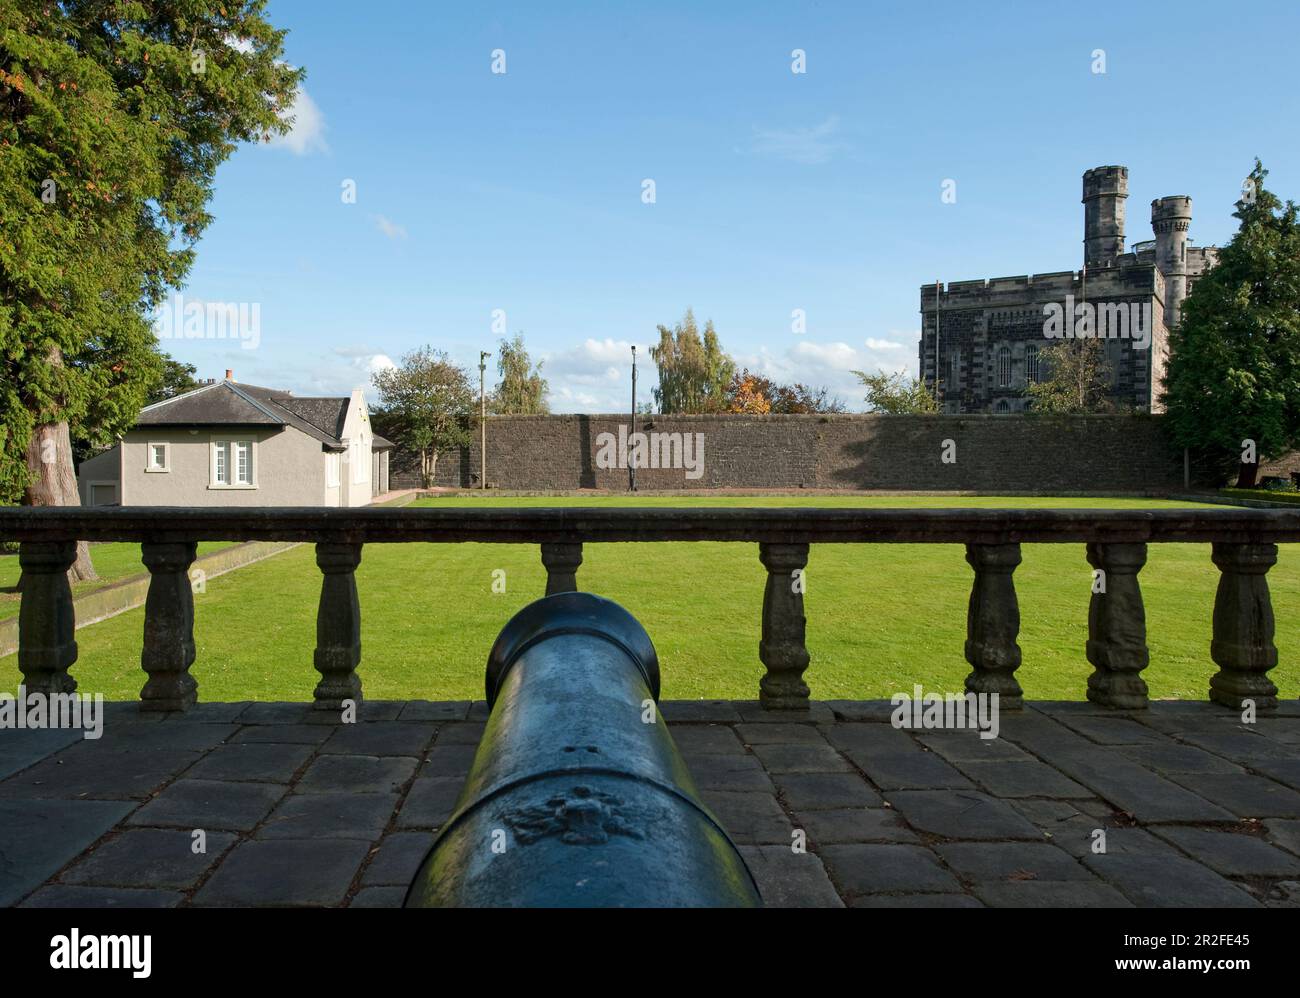 A cannon looks over the historic Old Stirling Green lawn bowling green in Stirling, Scotland, UK Stock Photo